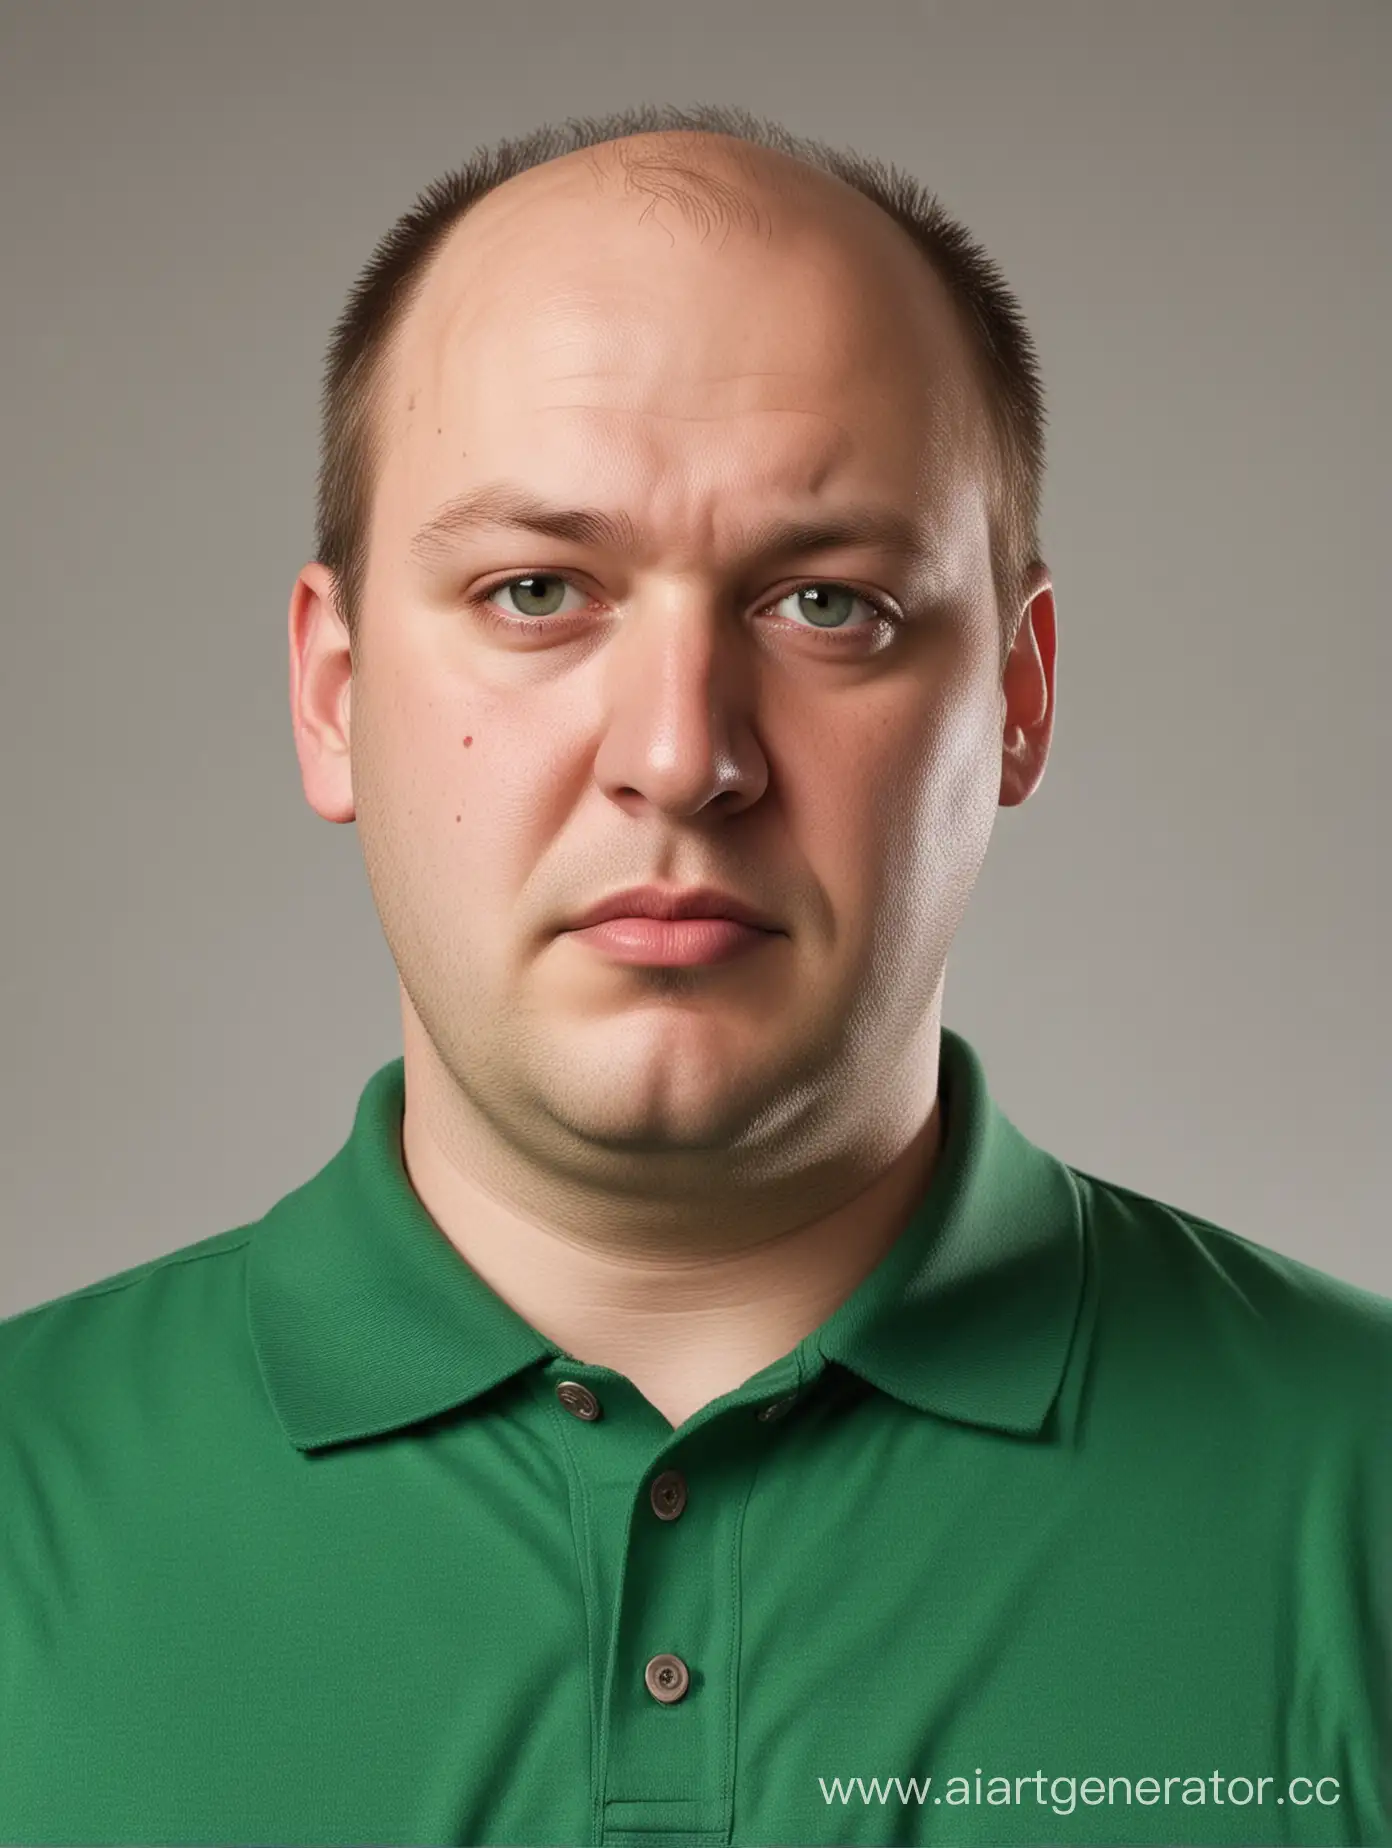 Chubby-Balding-Man-with-Red-Eyes-Wearing-Green-Polo-Shirt